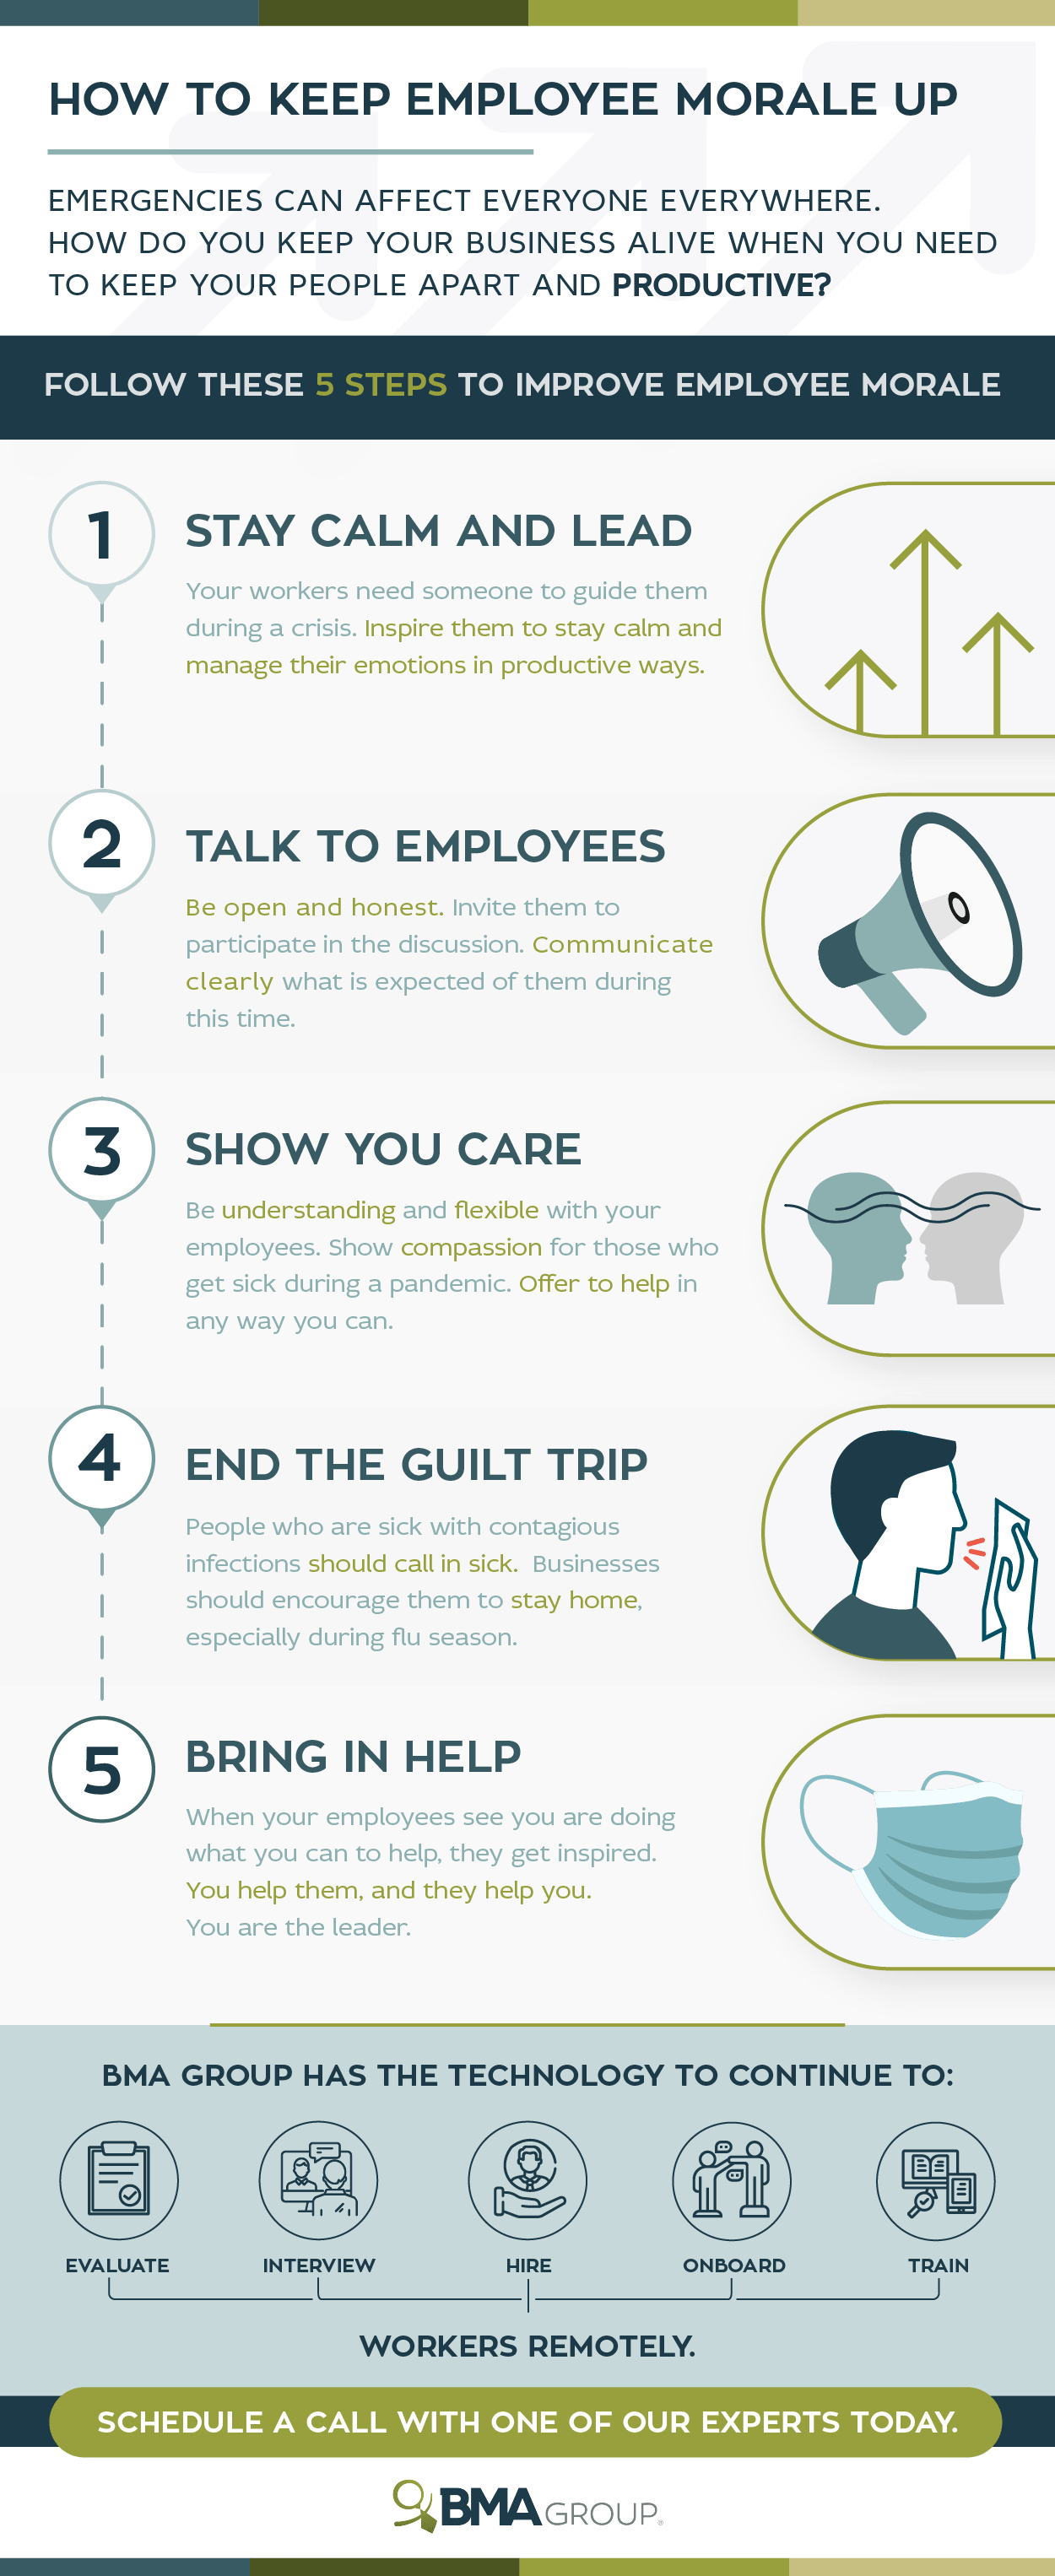 Ways to keep employee morale up